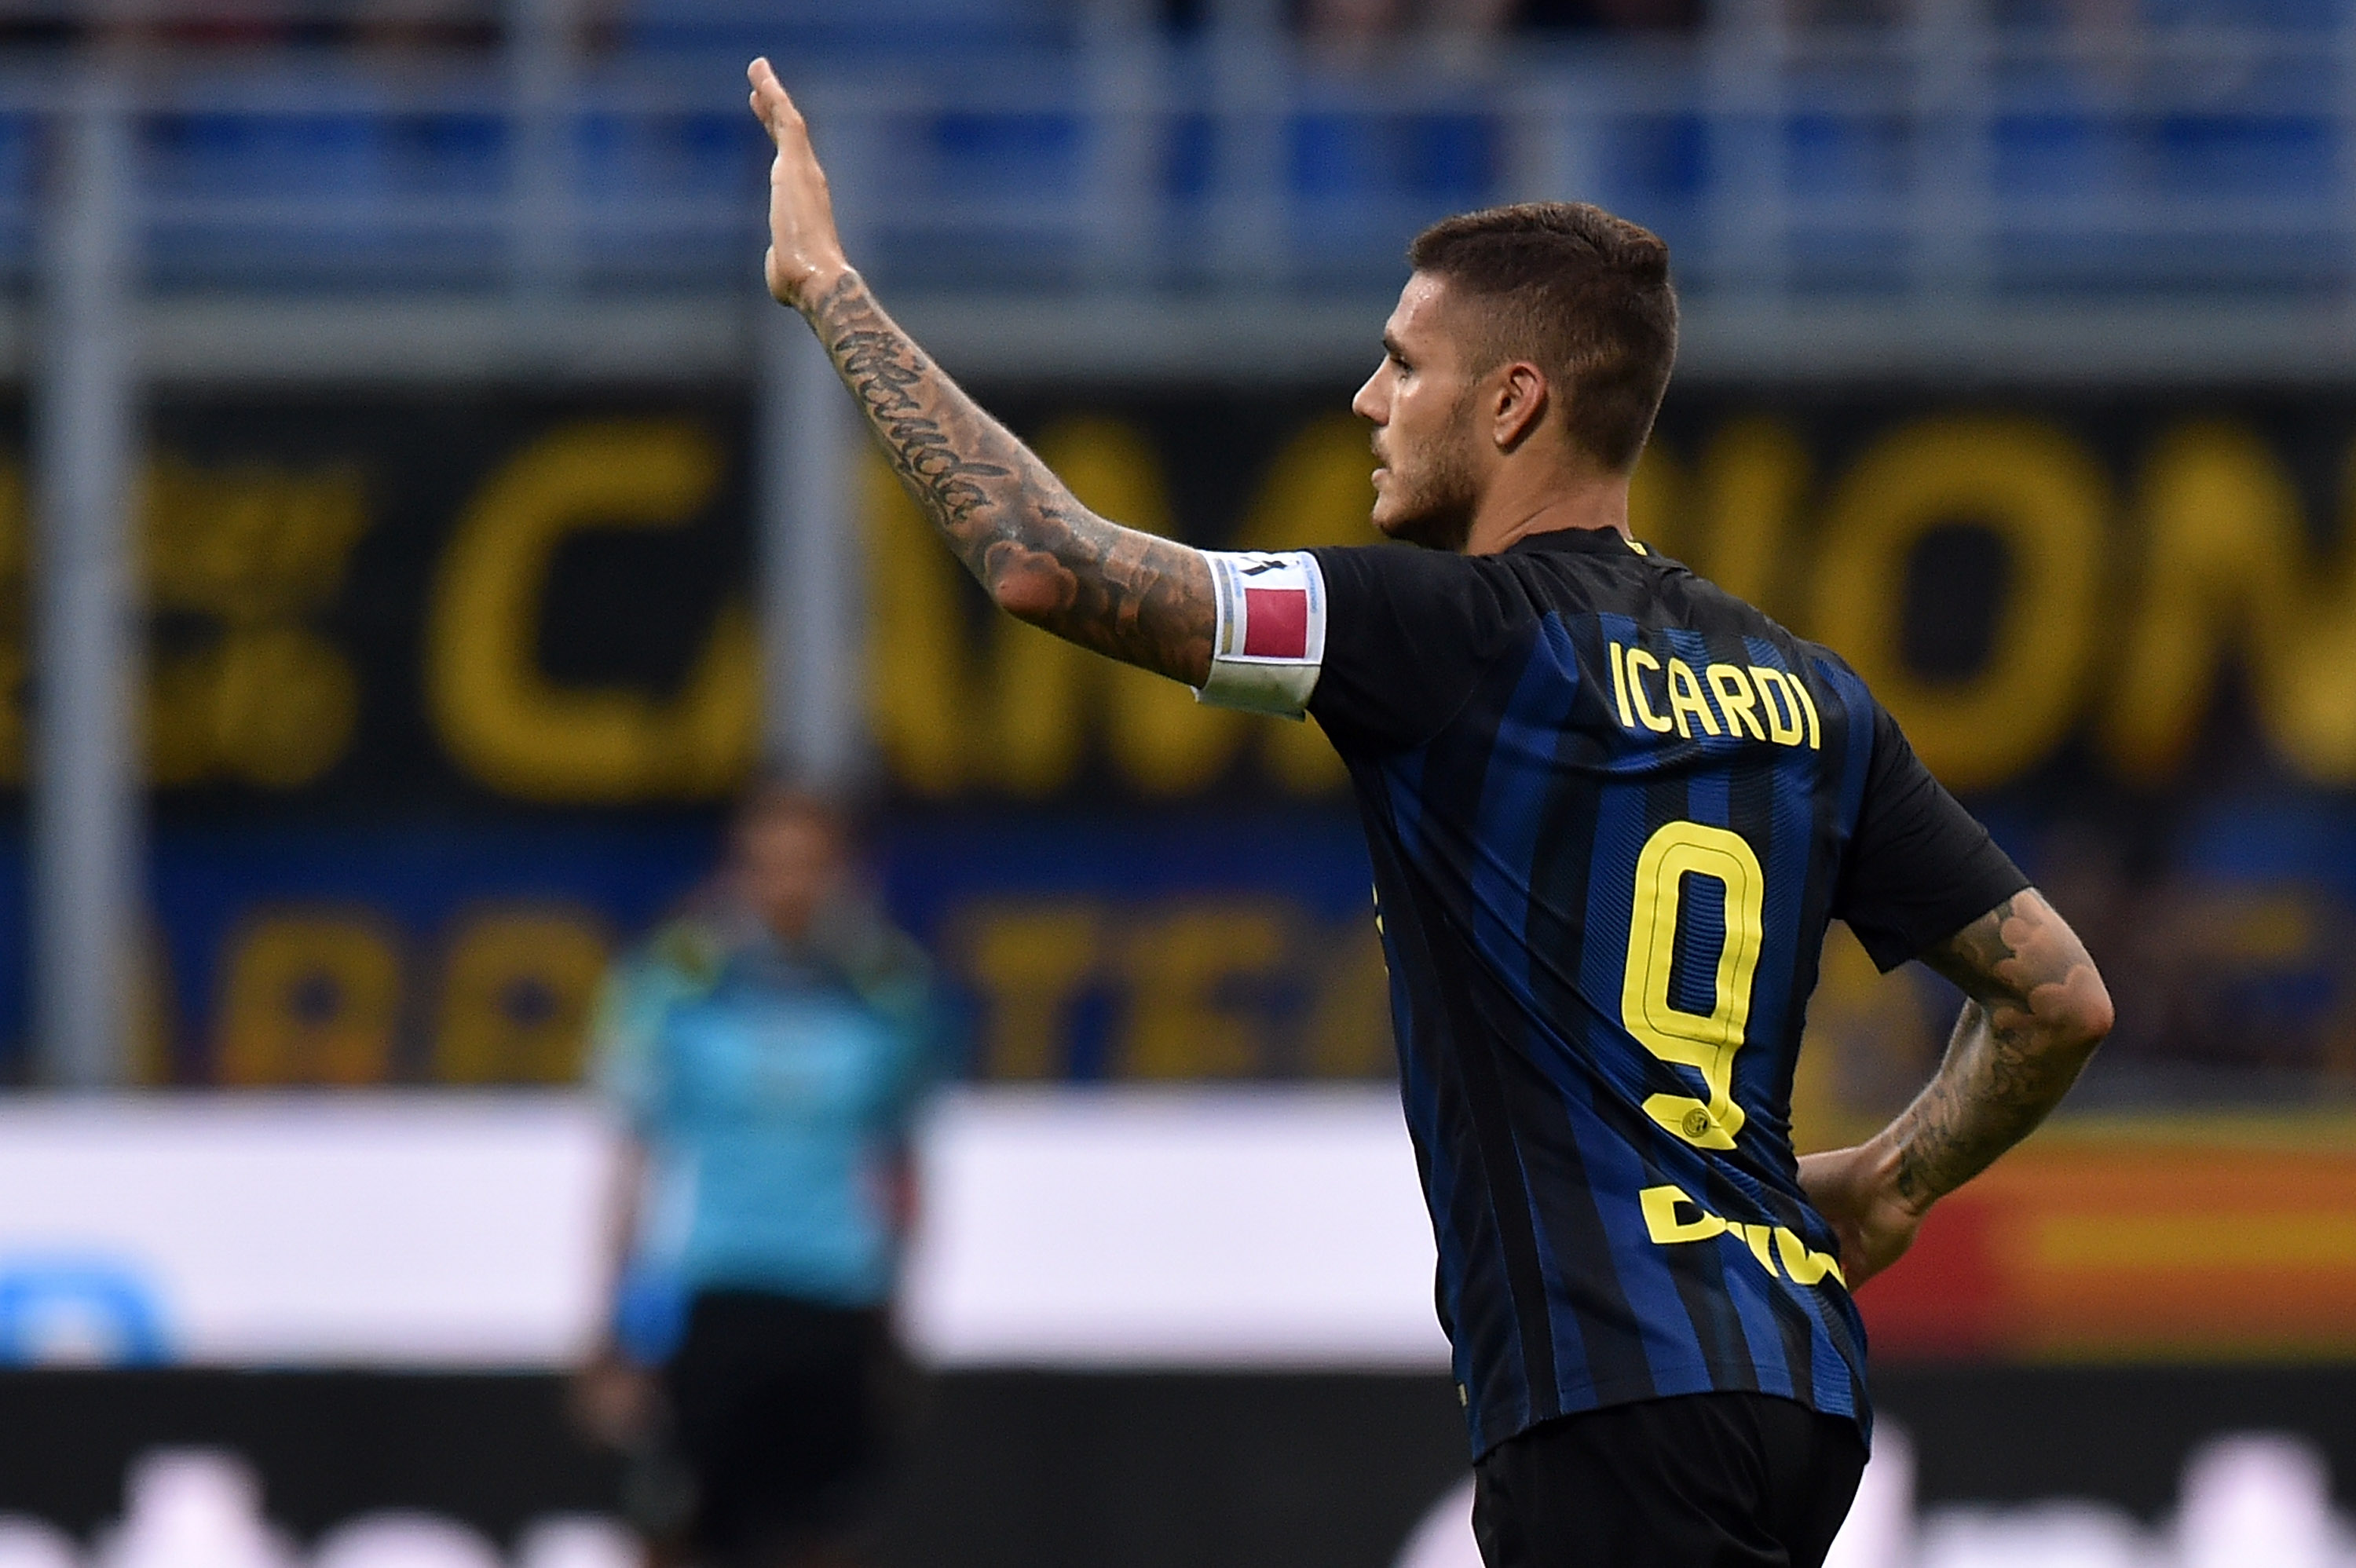 MILAN, ITALY - AUGUST 28:  Mauro Icardi of Internazionale celebrates after scoring the equalizing goal during the Seria A match between FC Internazionale and US Citta di Palermo at Stadio Giuseppe Meazza on August 28, 2016 in Milan, Italy.  (Photo by Tullio M. Puglia/Getty Images)